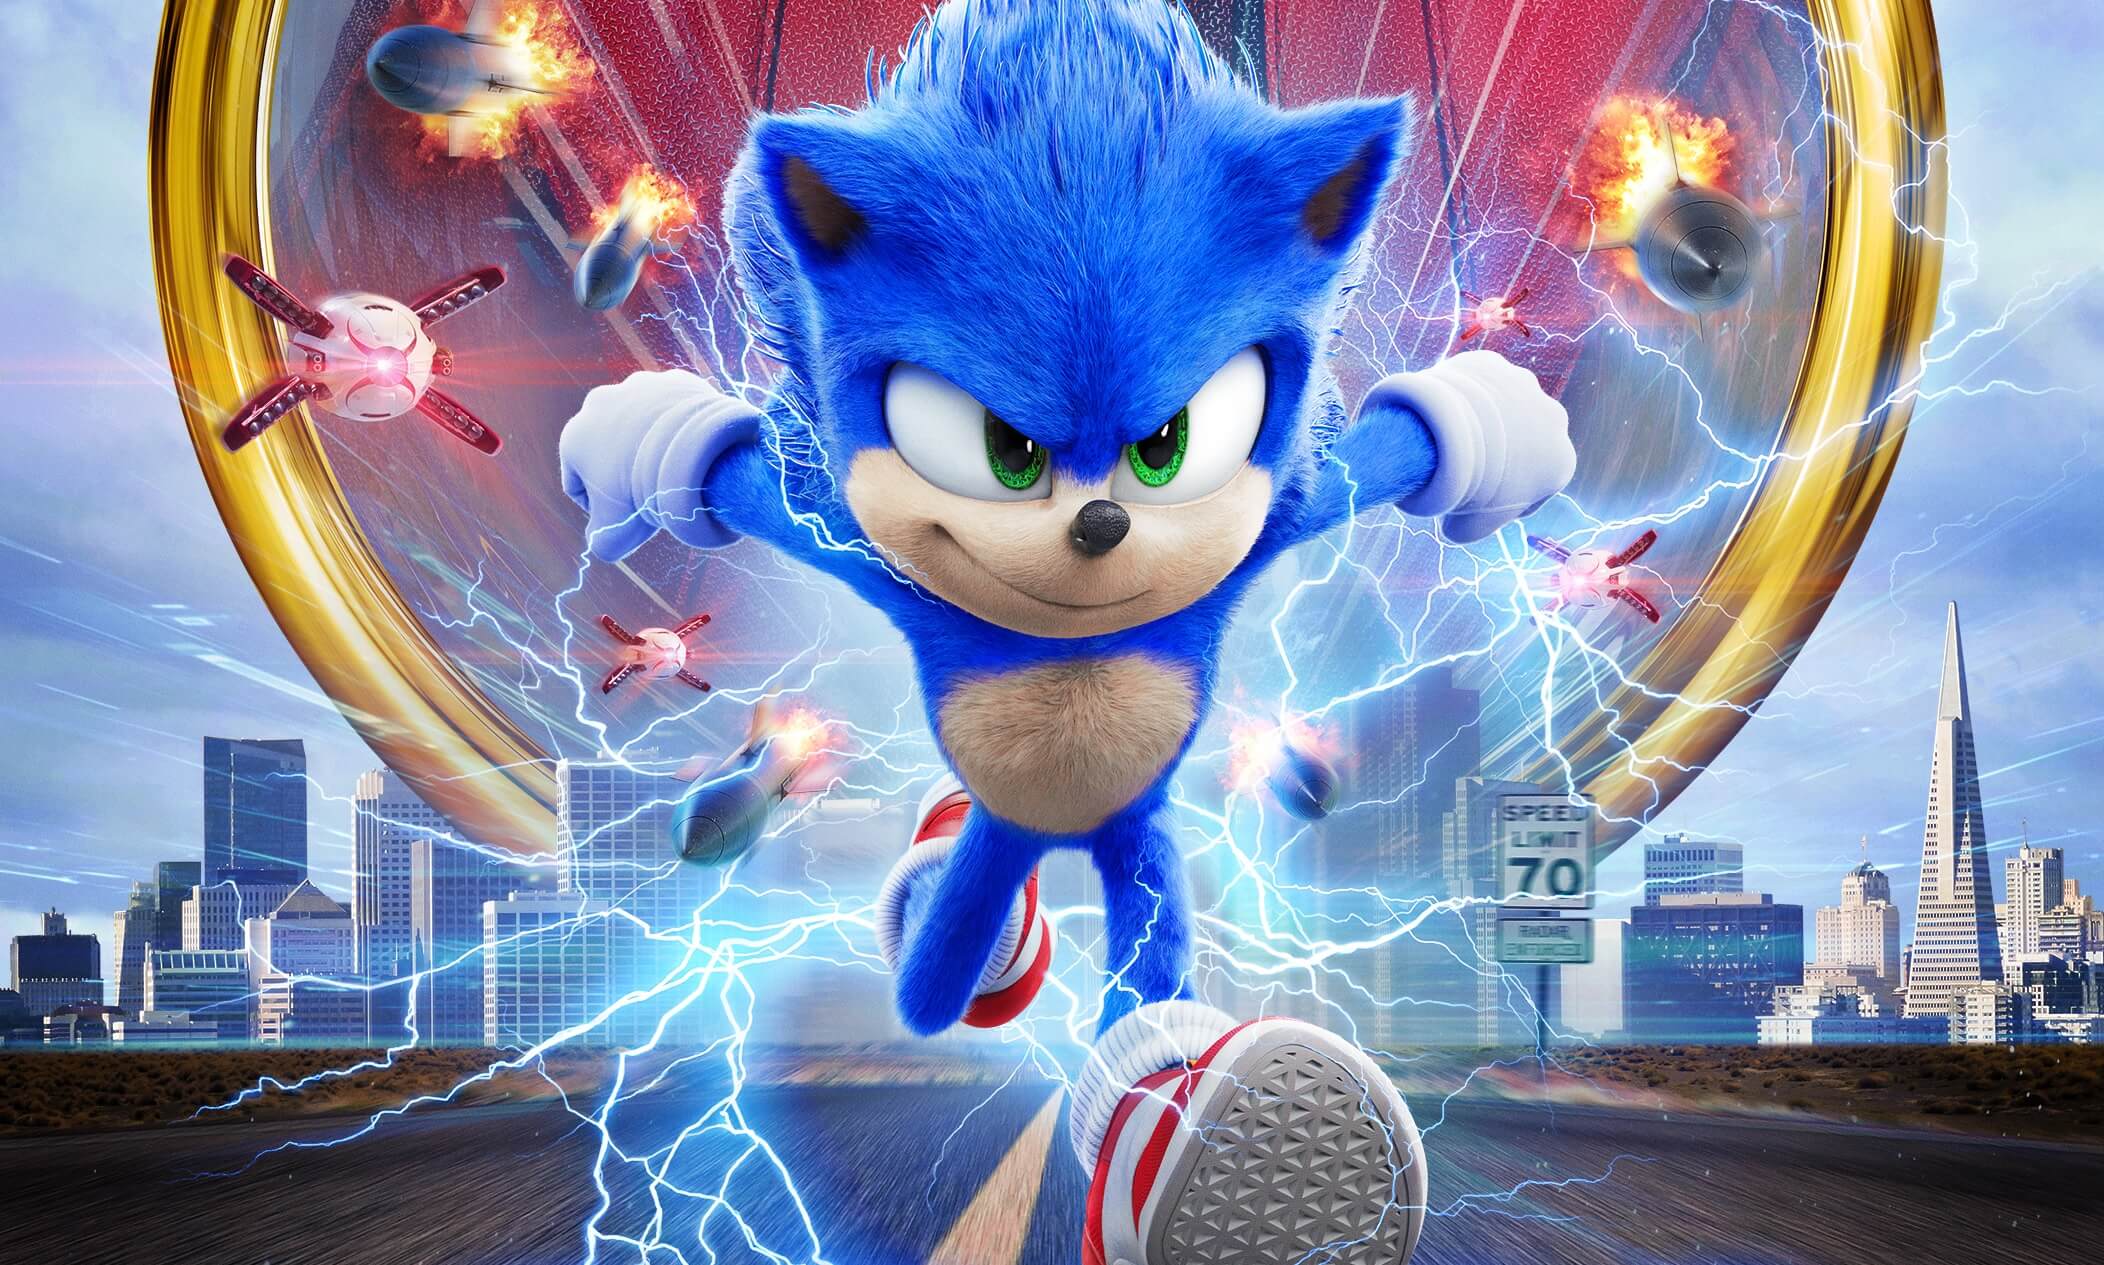 The sequel of the movie Sonic the Hedgehog has now an official title